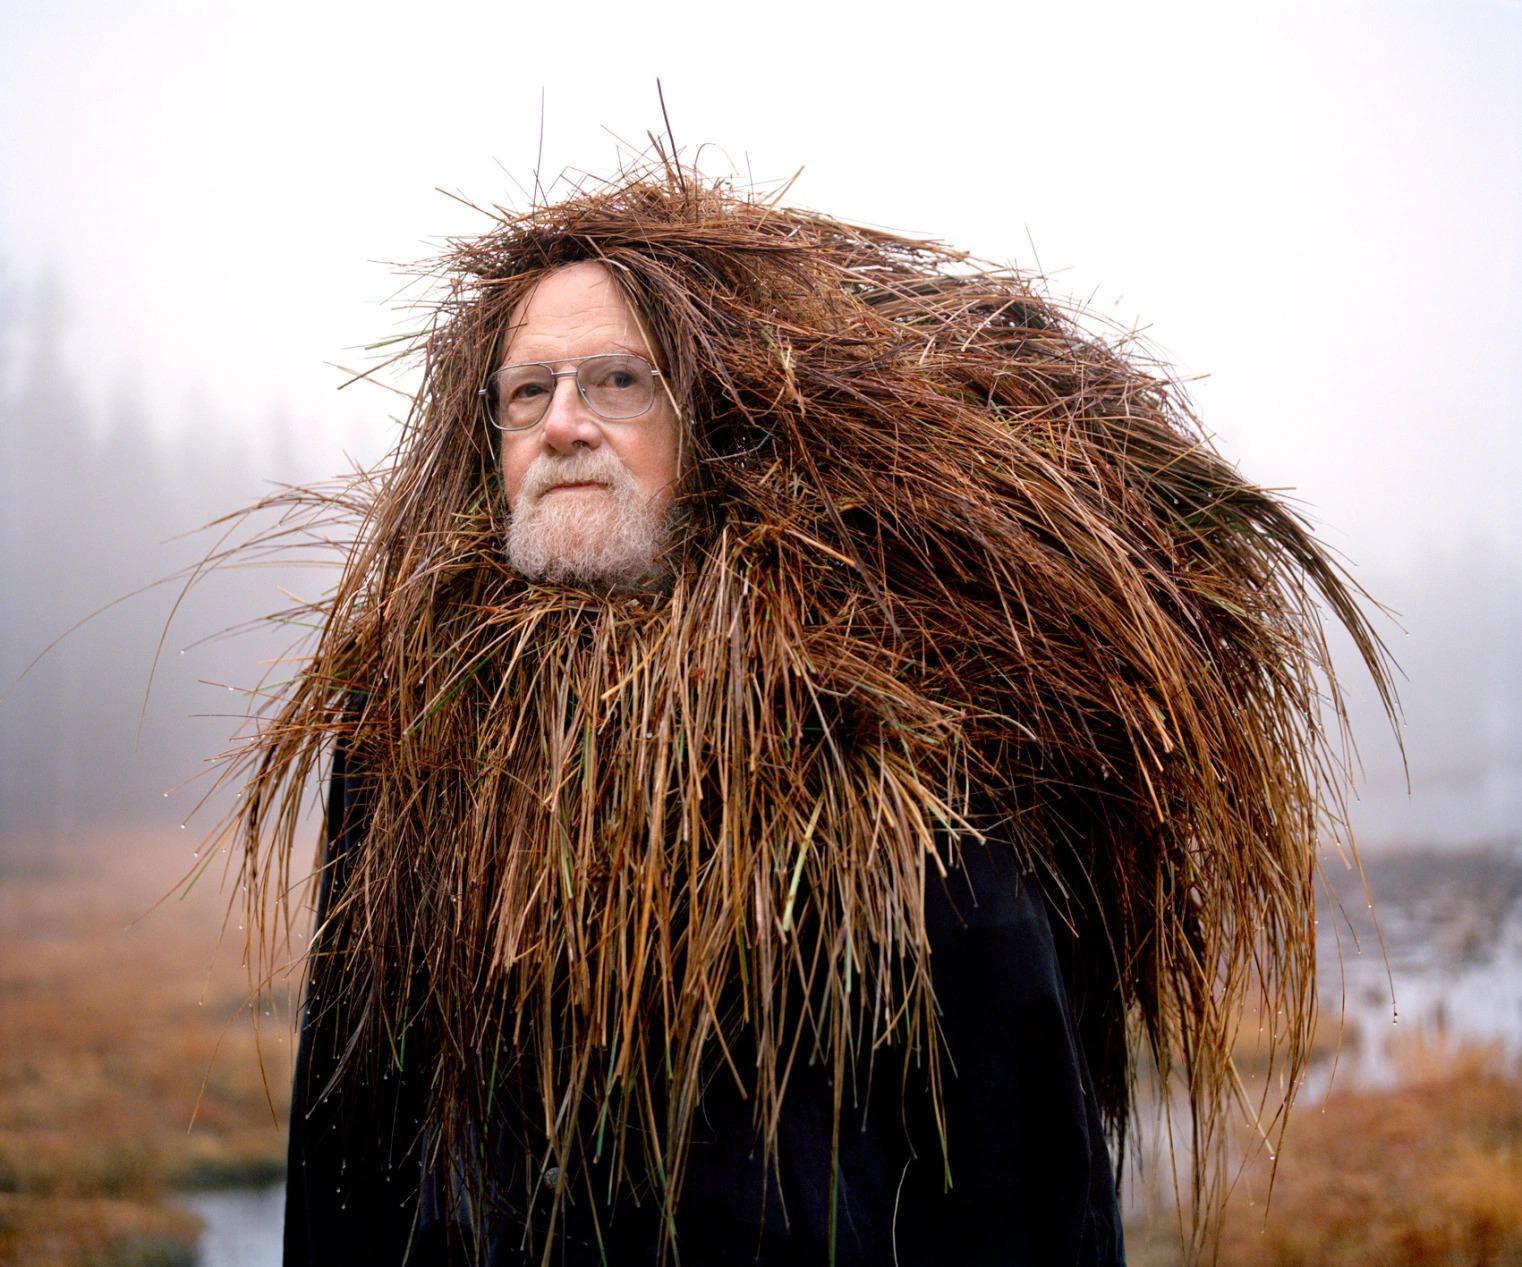 Eyes as Big as Plates is the ongoing collaborative project between the Finnish-Norwegian artist duo Riitta Ikonen and Karoline Hjorth. Starting out as a play on characters from Nordic folklore, Eyes as Big as Plates has evolved into a continual search for modern human’s belonging to nature.